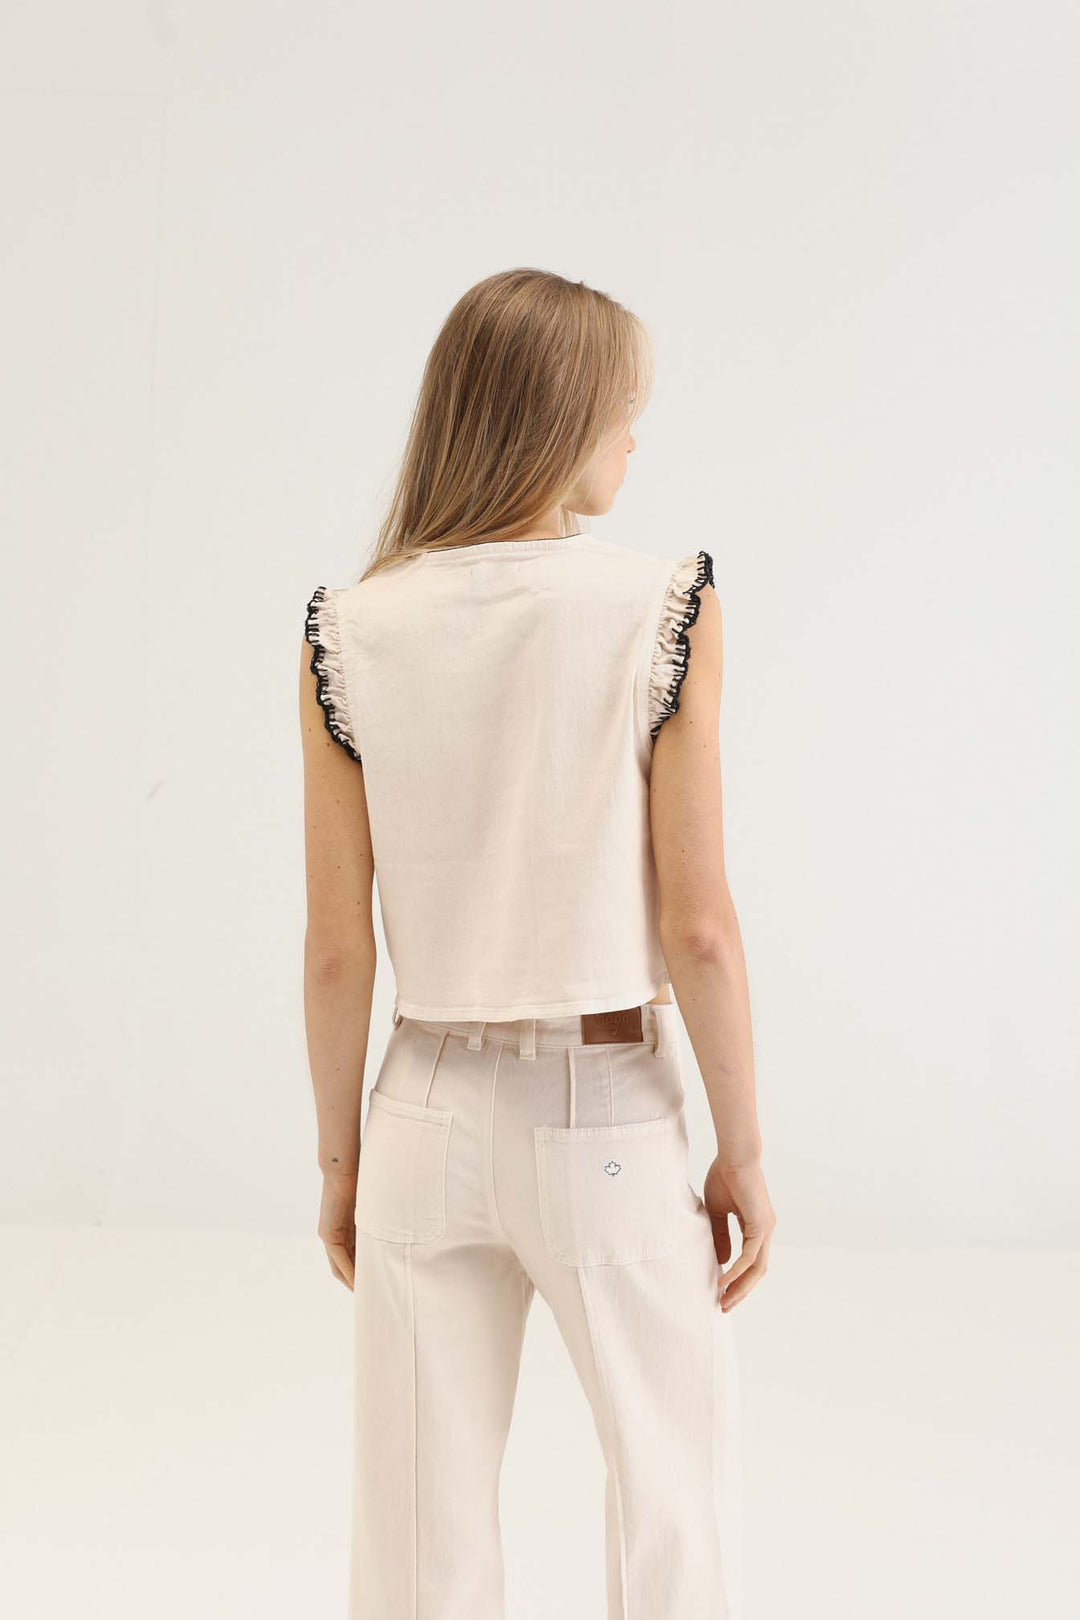 CONTRAST EMBROIDERY VEST